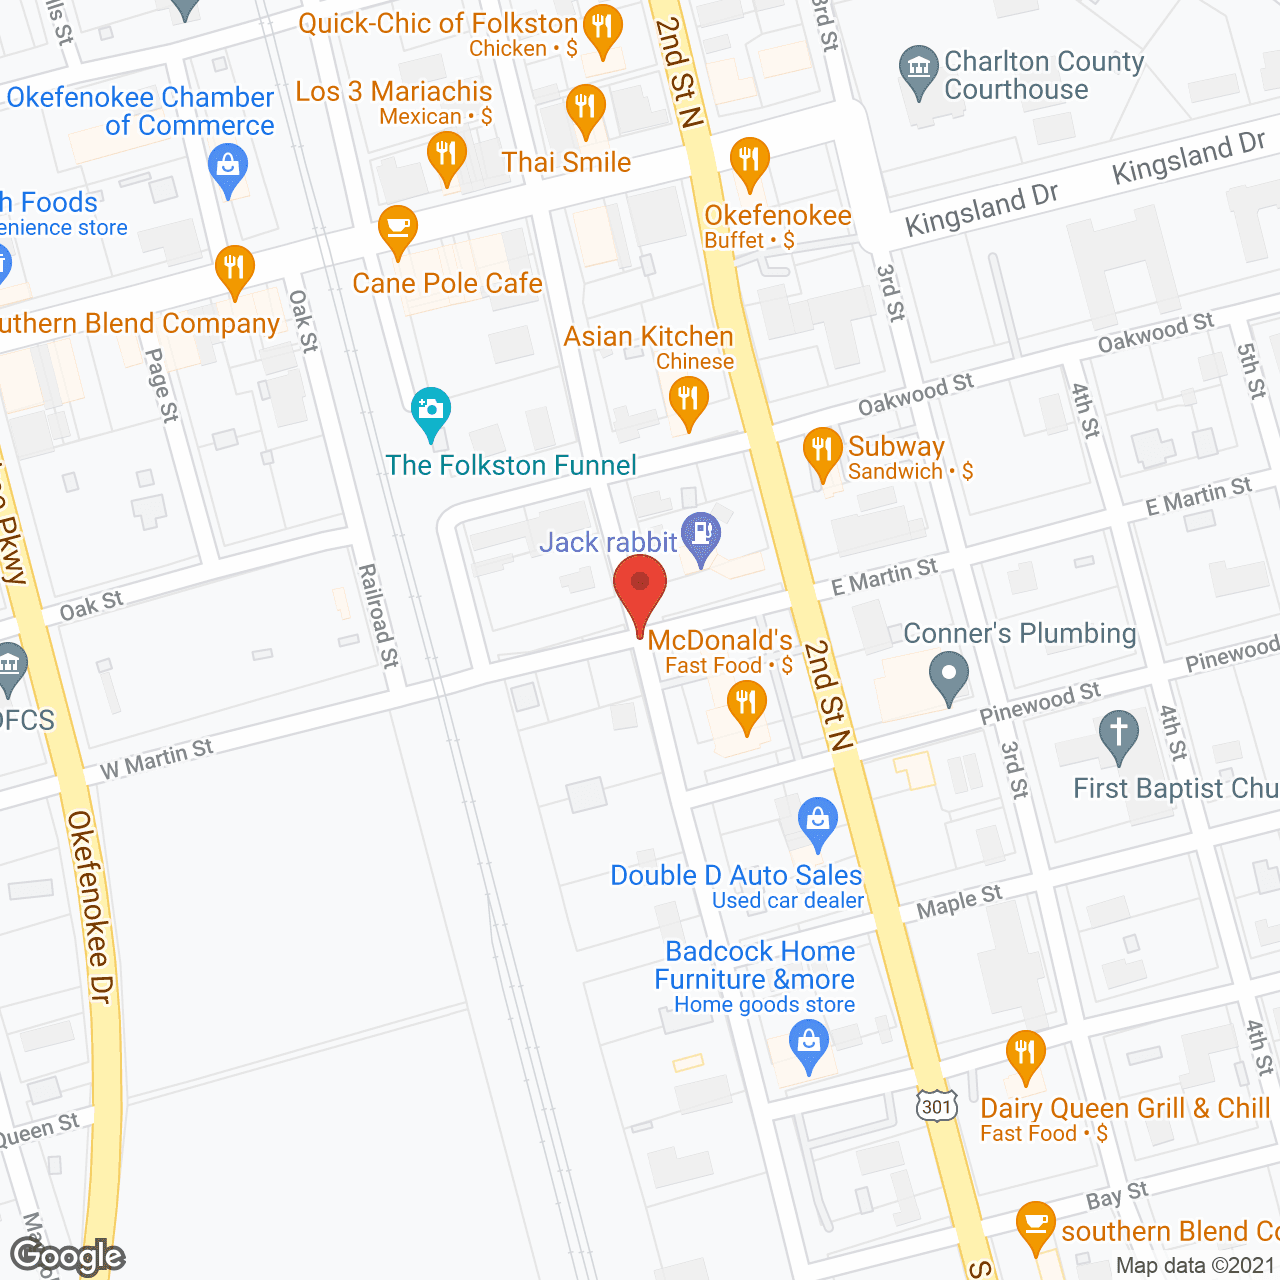 Health Department Home Care in google map